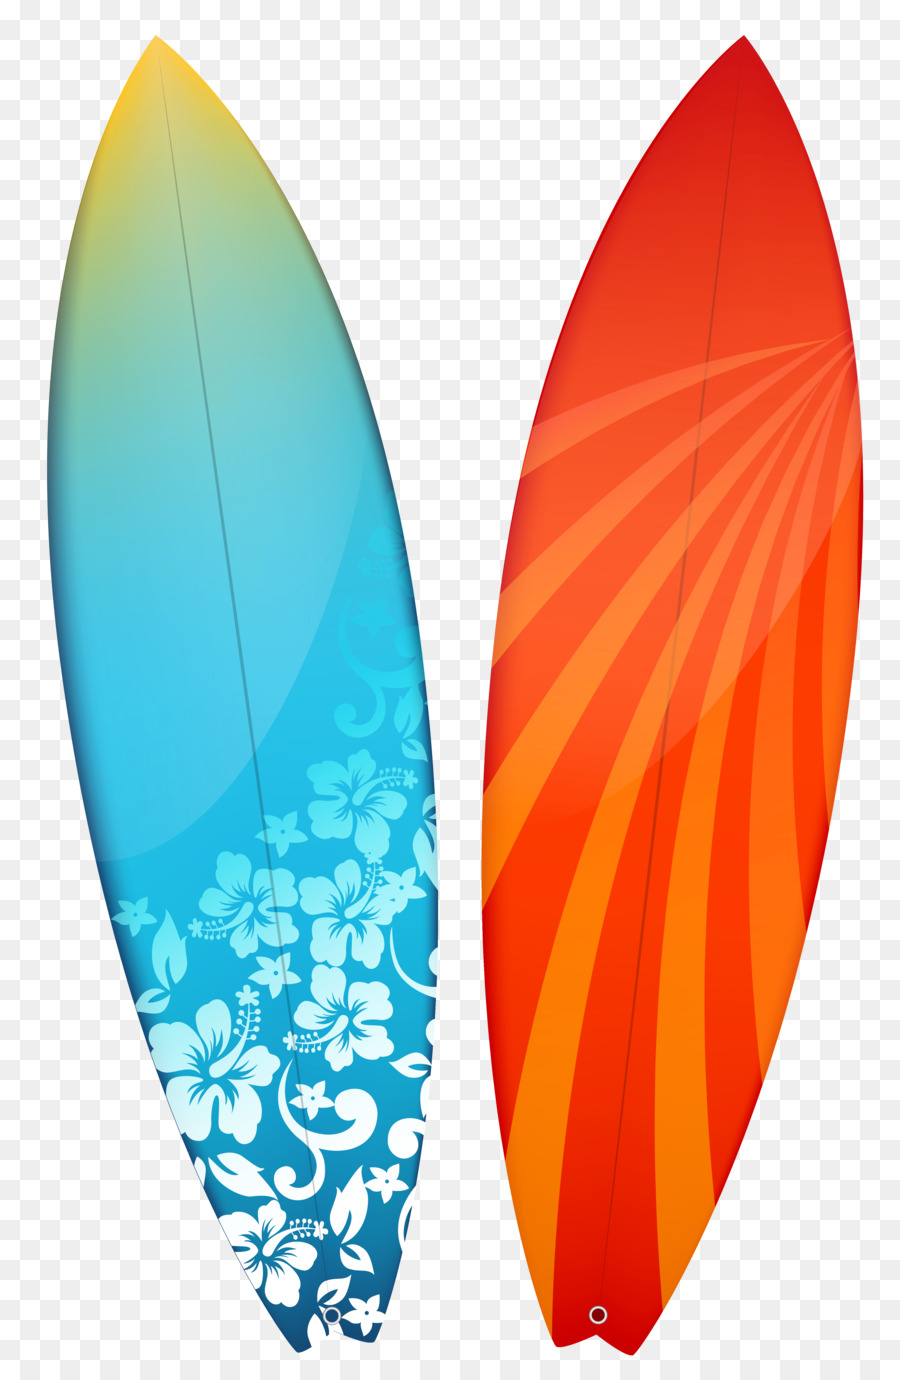 Surfboard Surfing Clip art - icicles png download - 4146*6280 - Free Transparent Surfboard png Download.